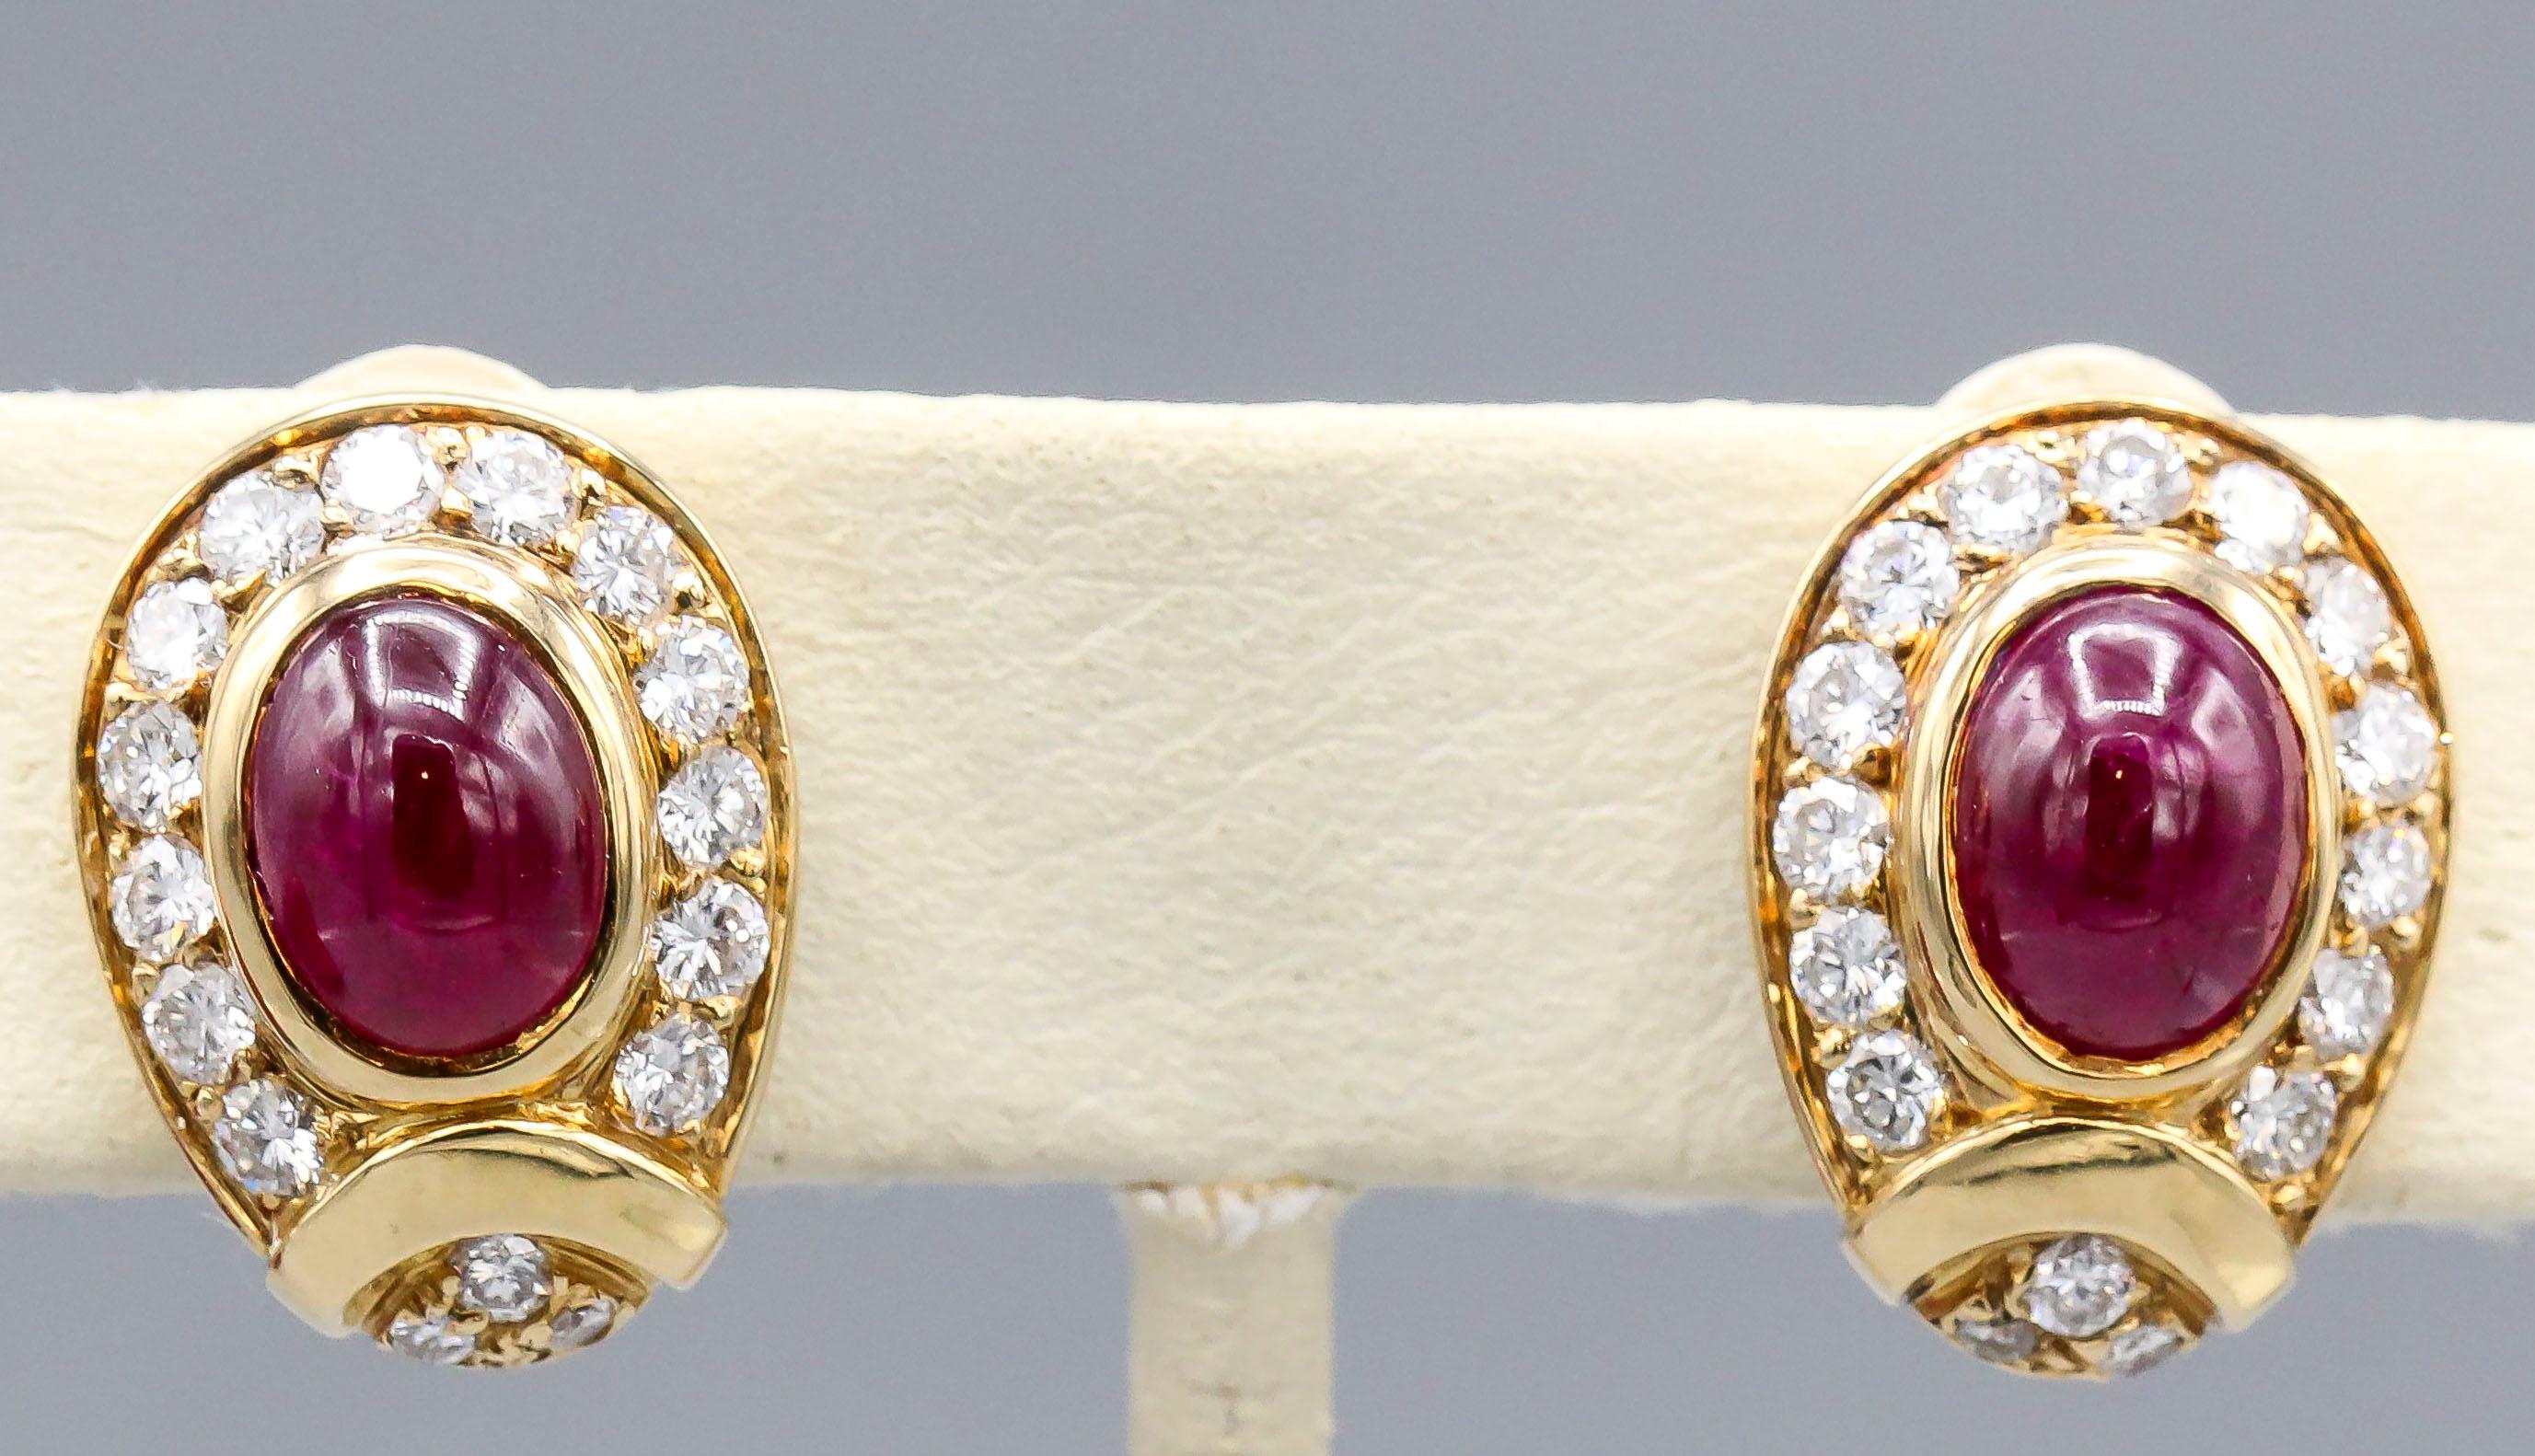 Elegant cabochon ruby, diamond and 18K yellow gold earrings by Cartier, made in Paris. They feature rich red oval cabochon rubies in the center, surrounded by very high grade round cut diamonds. Beautifully made and great for day or evening